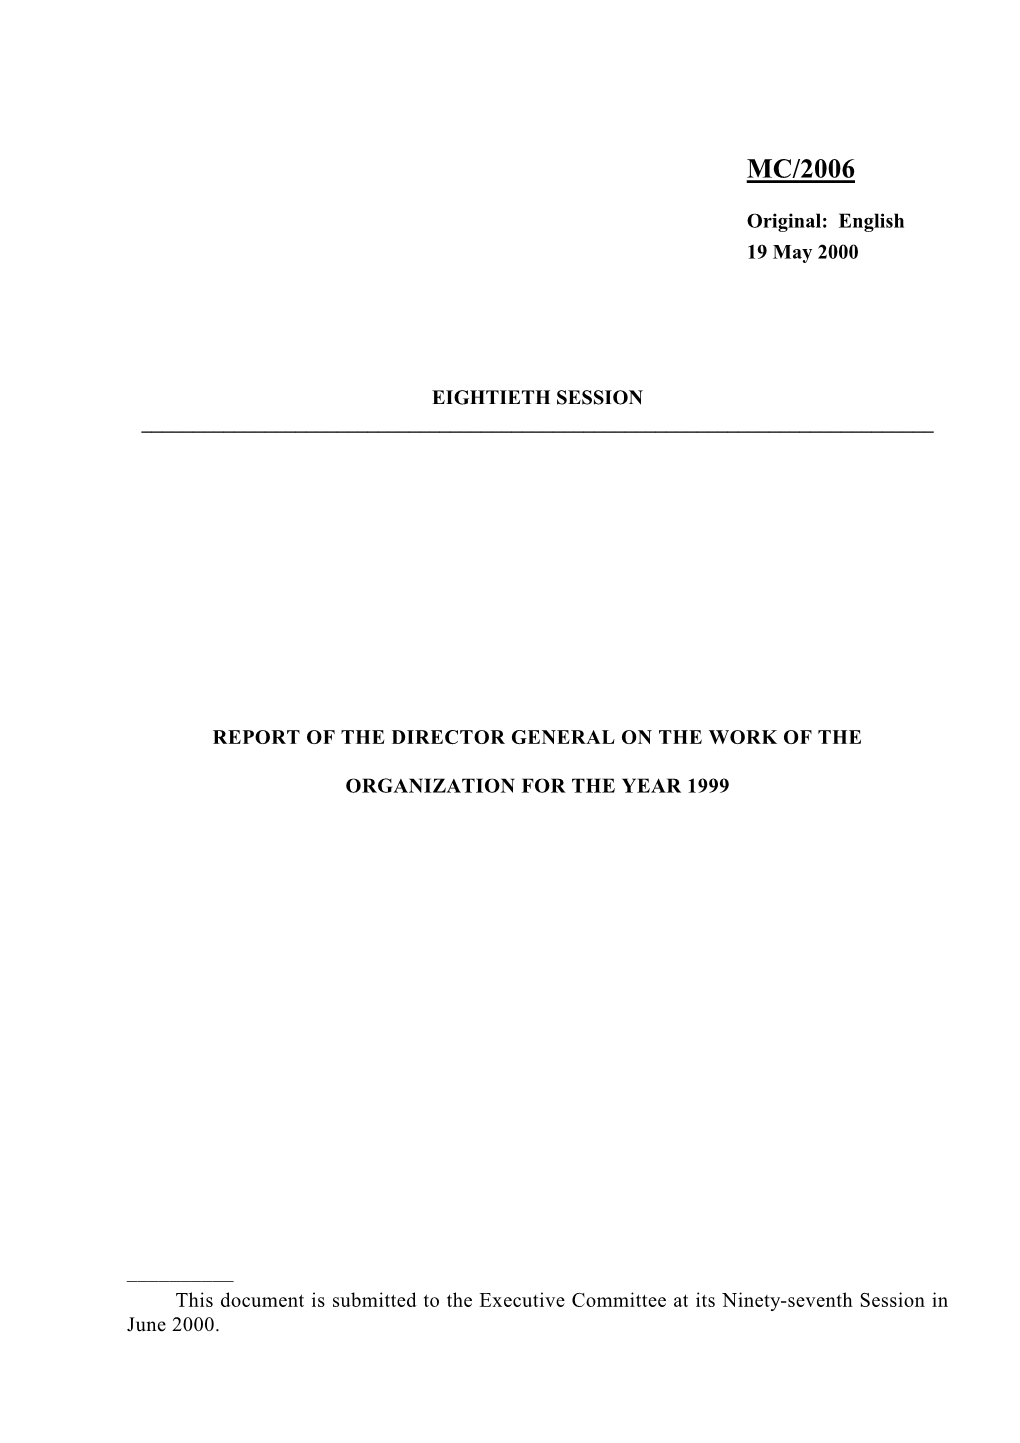 MC/2006 Report of the Director General on the Work of The